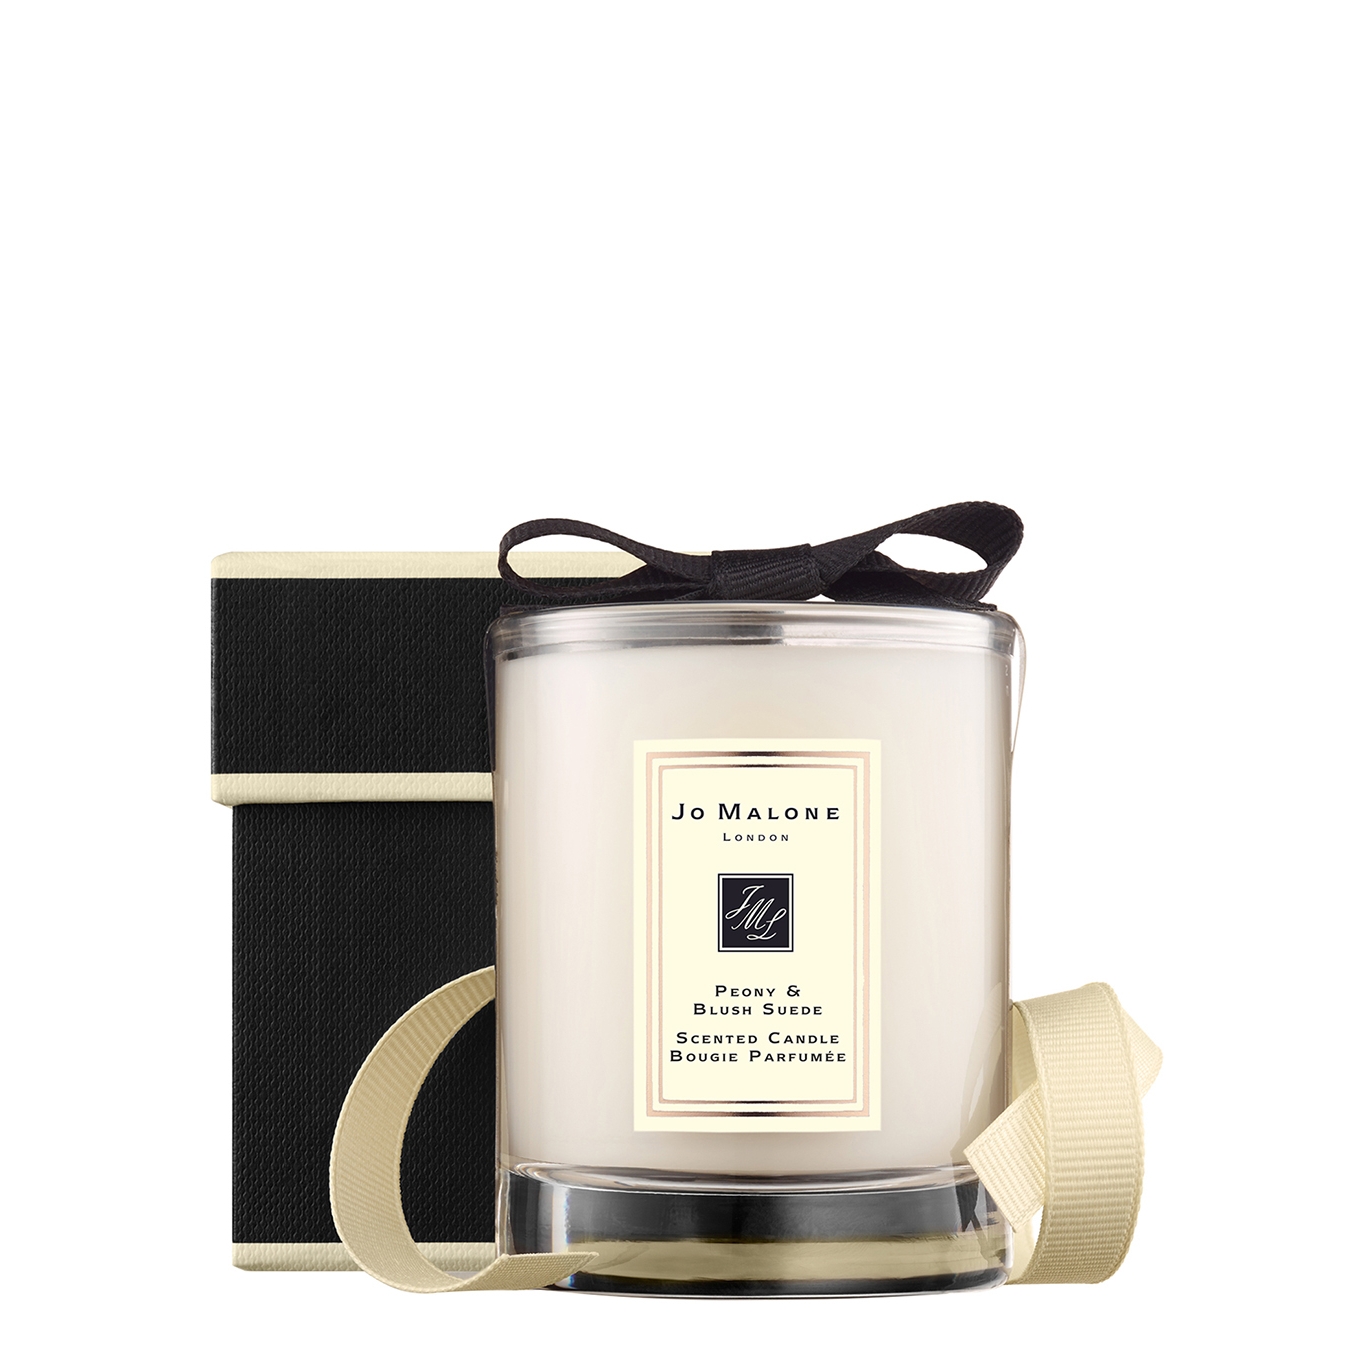 Jo Malone London Peony Blush Suede Travel Candle, Fragrance, Floral In Black